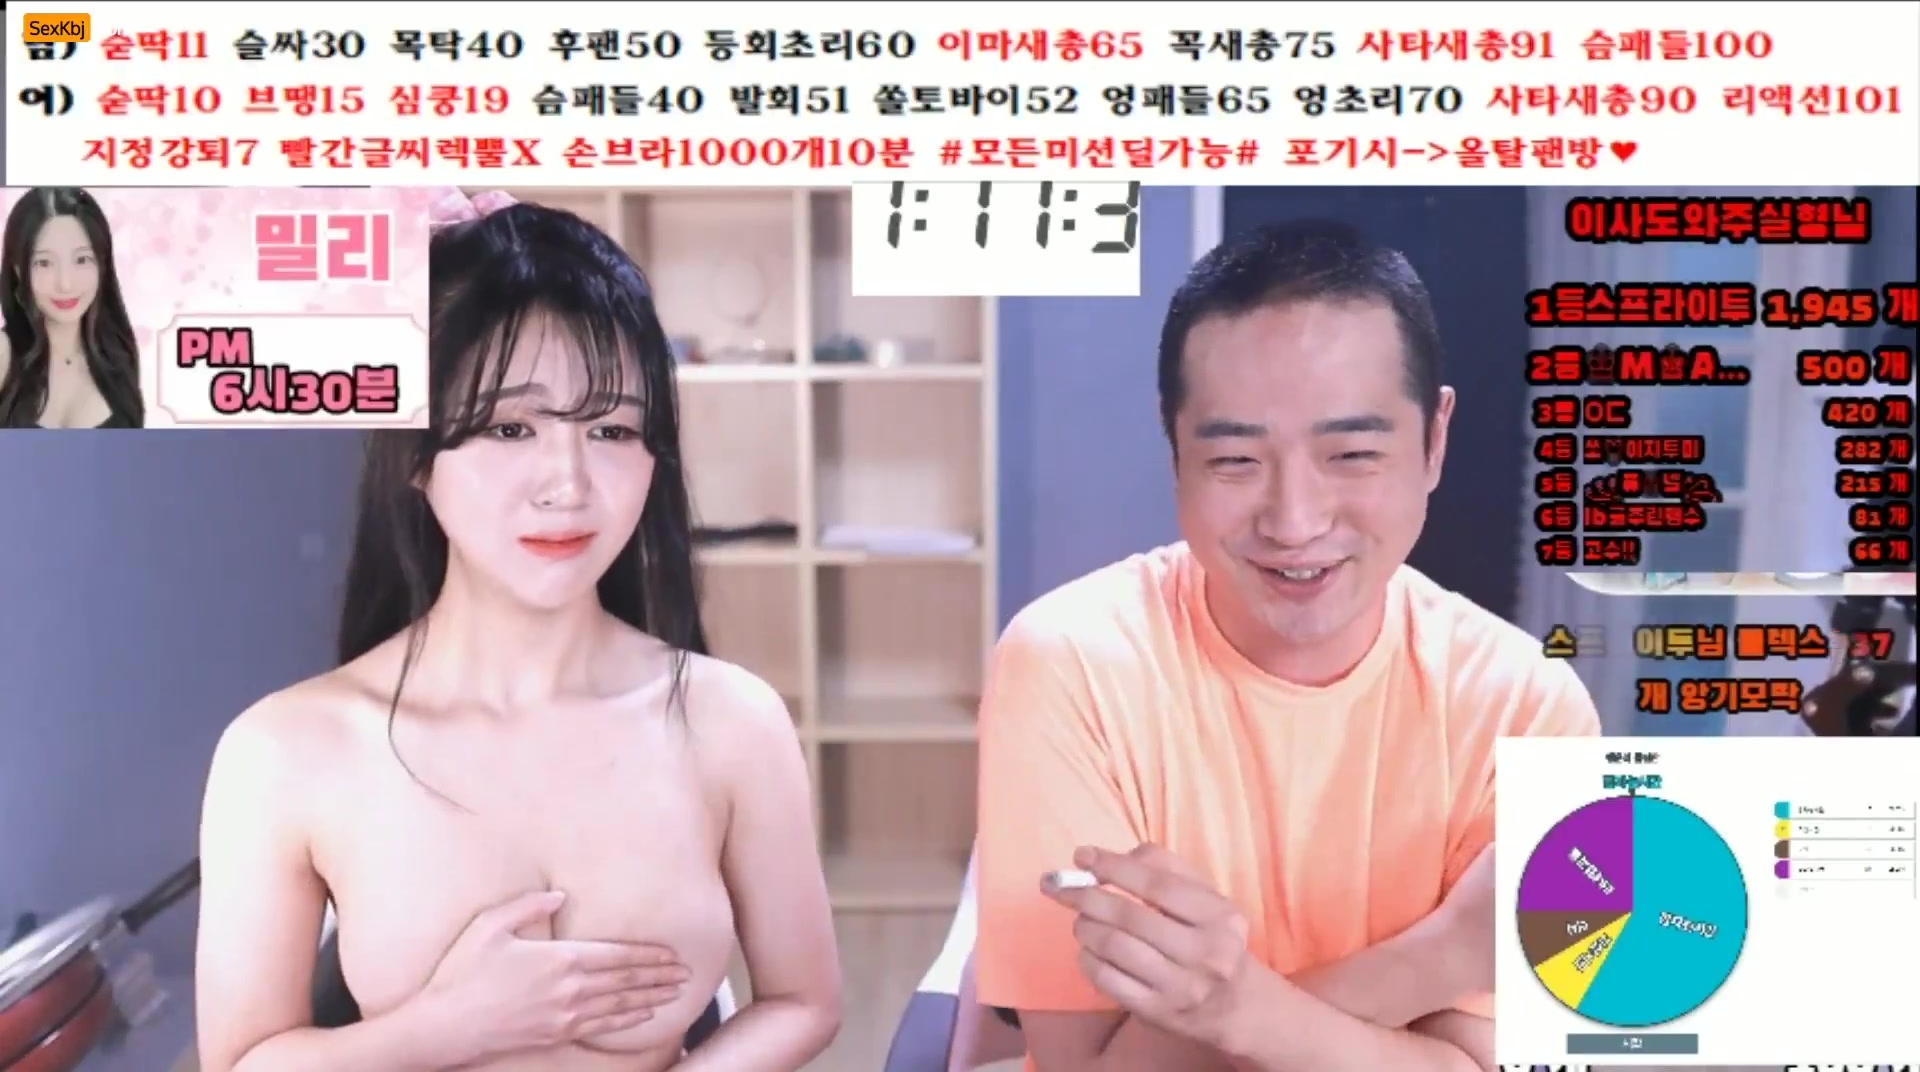 South Korea Confuses Couples with Slingshot to the Lower Body (4)